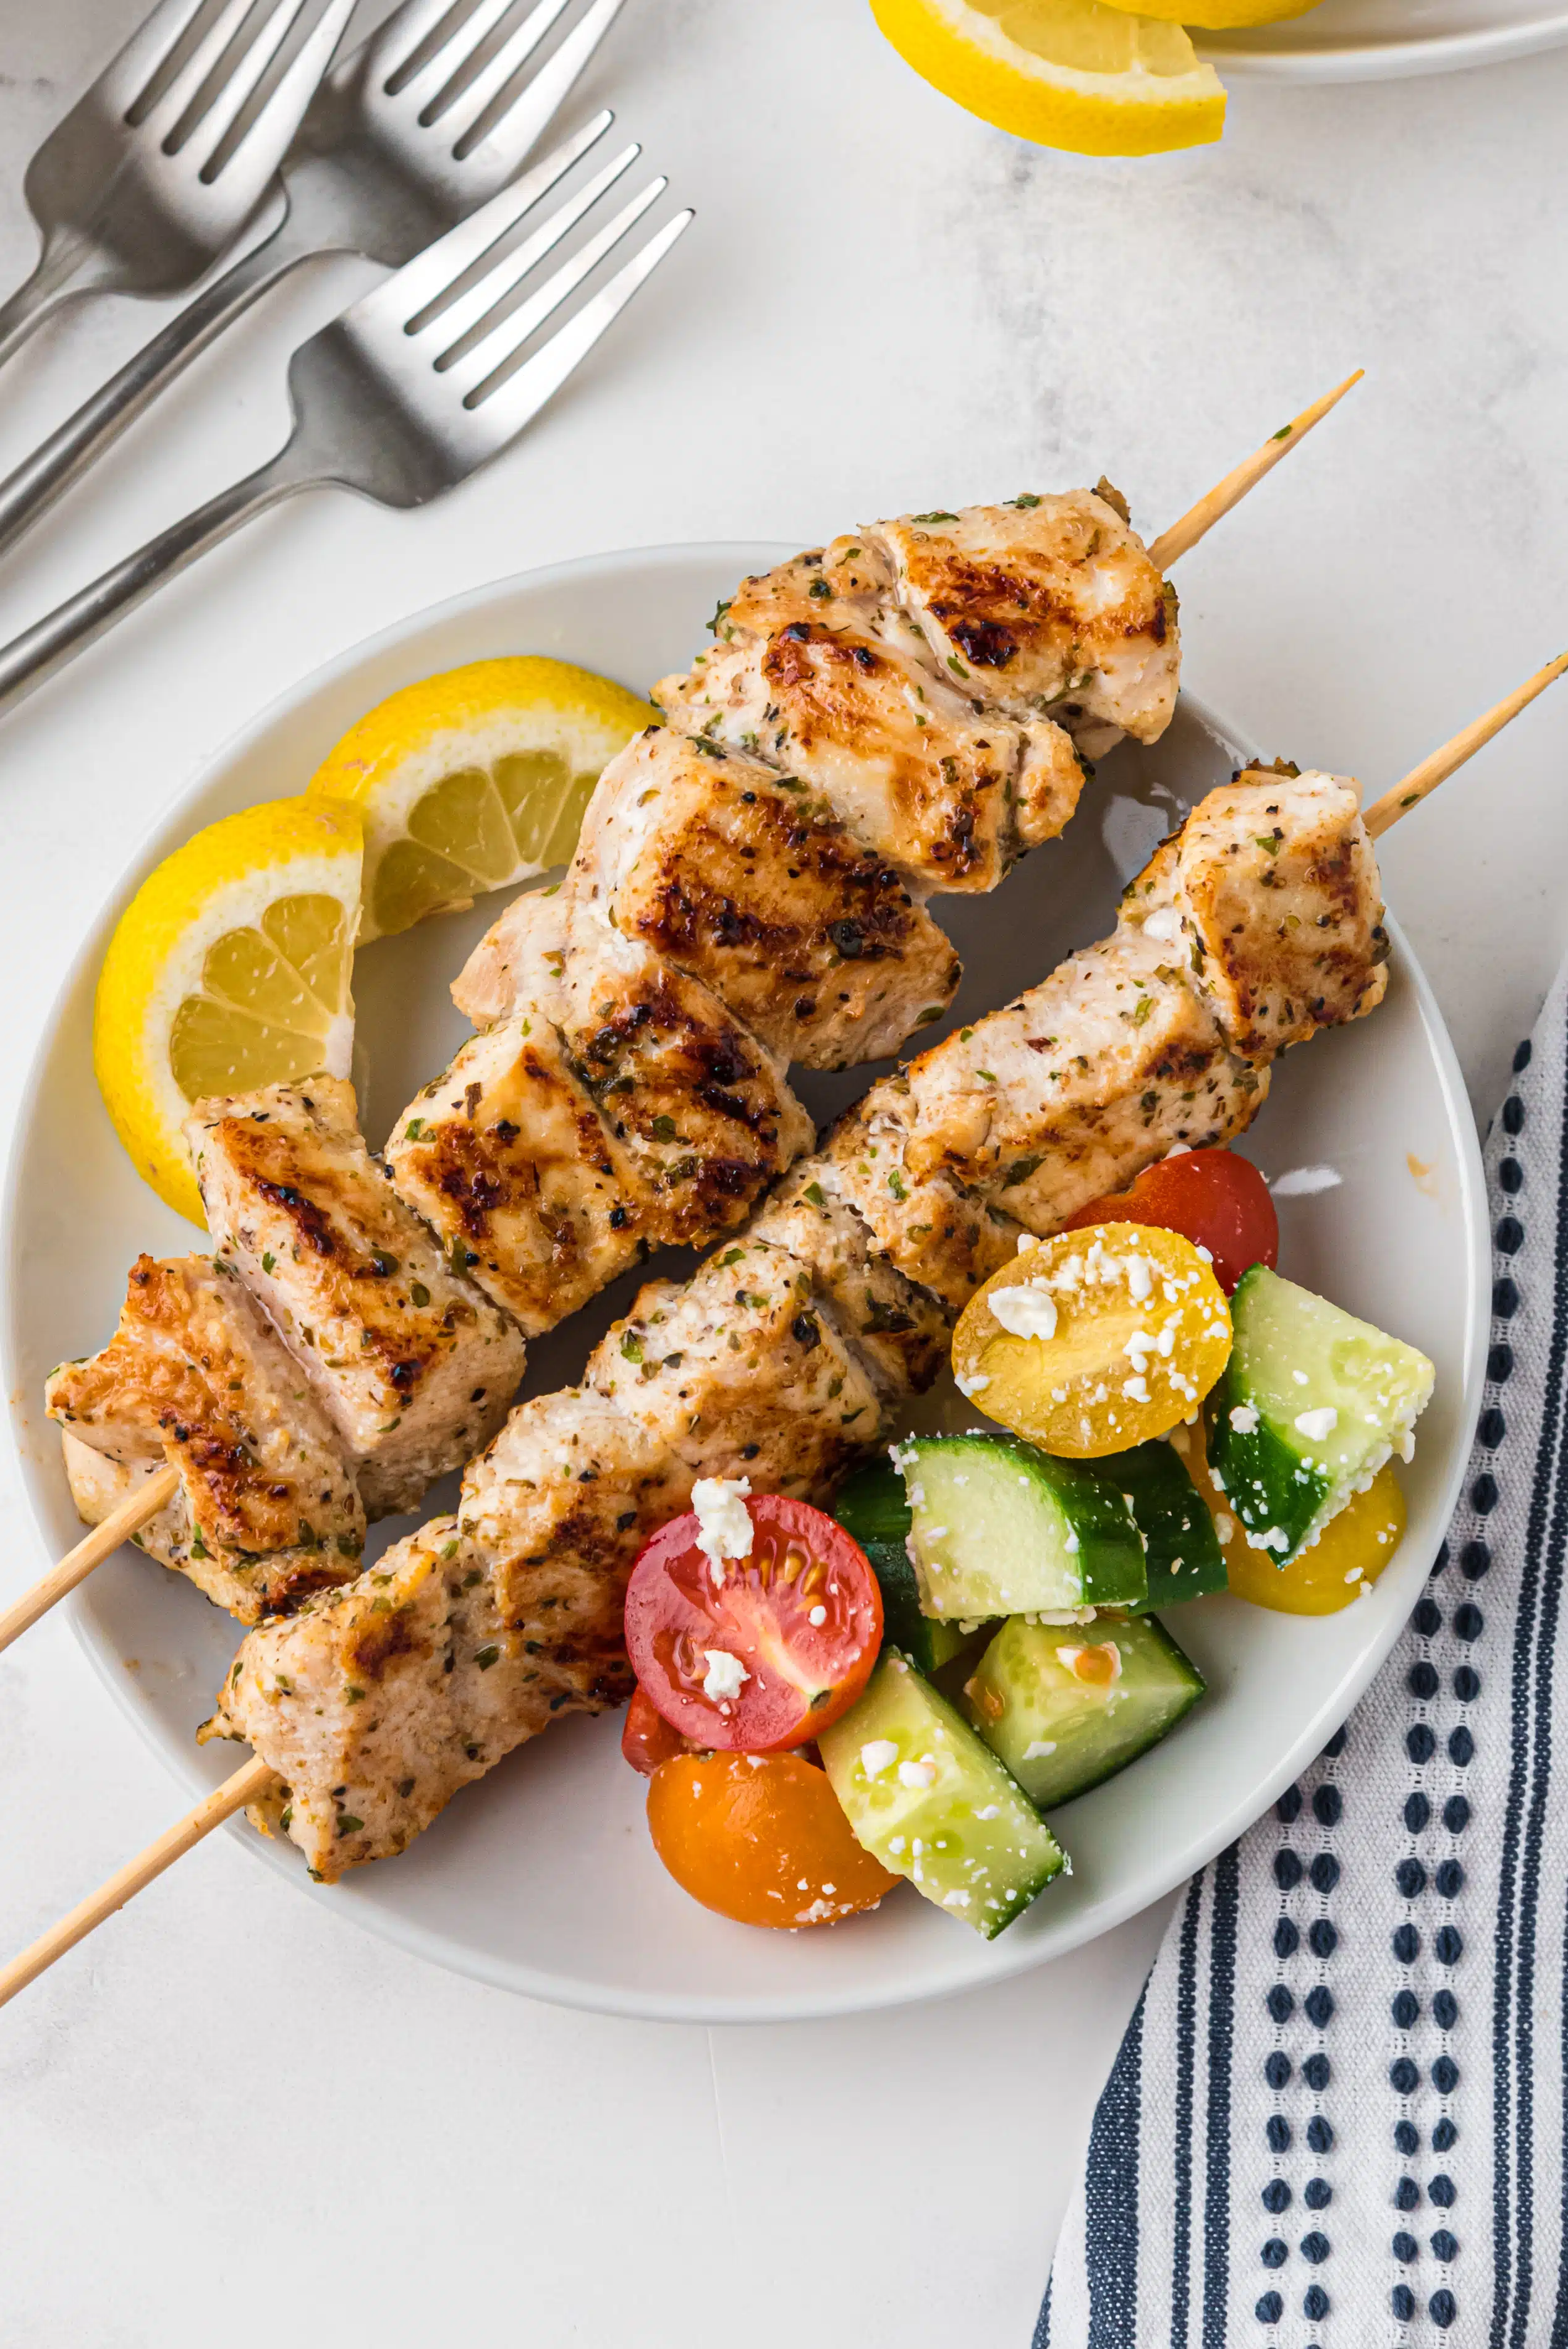 Dinner plate filled with two chicken skewers, lemon slices, and a side of greek salad.